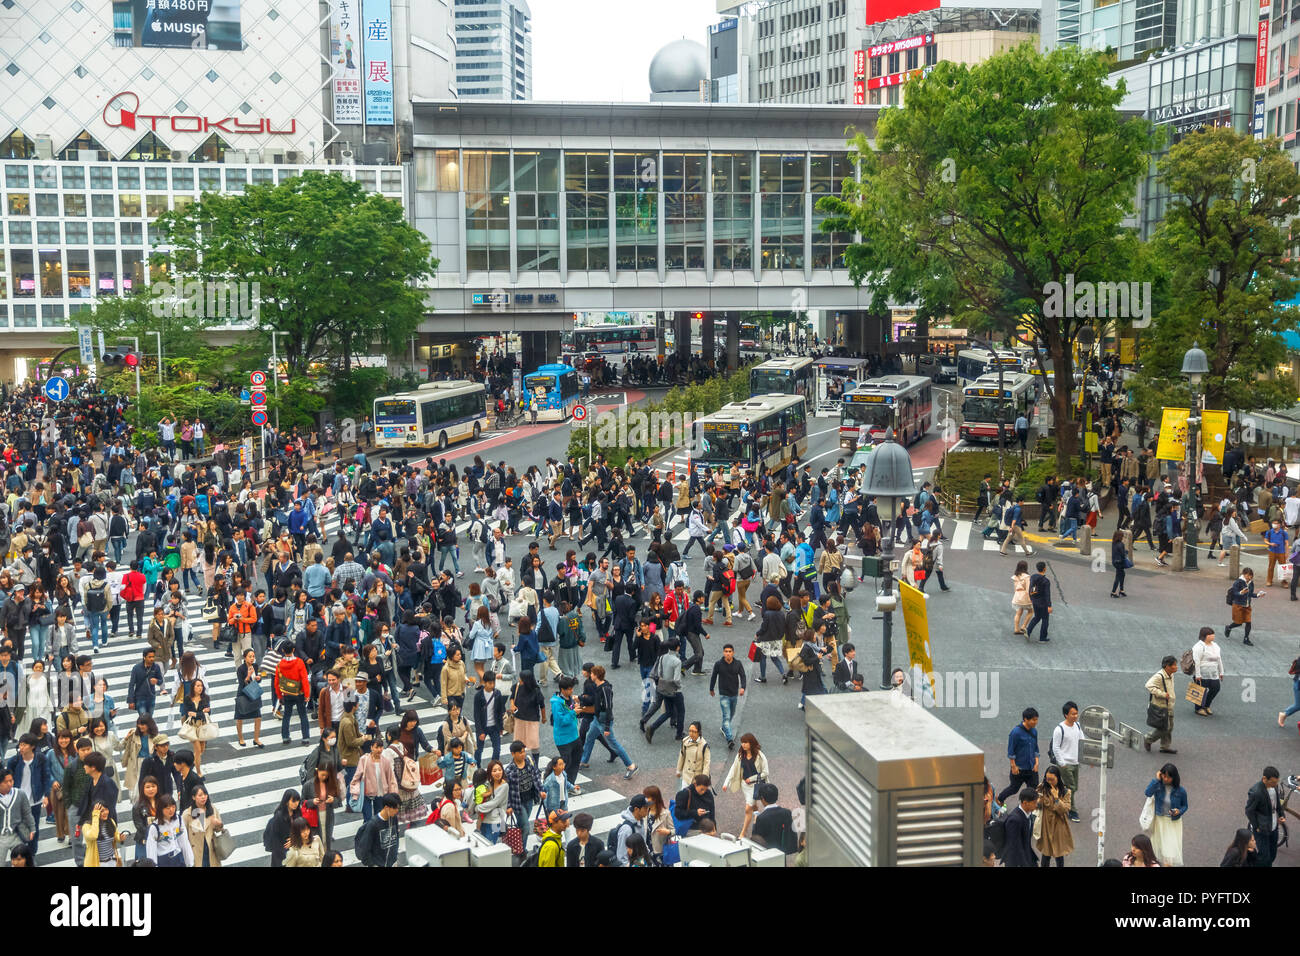 Tokyo Japan April 22 17 Aerial View Of Unidentified Pedestrians In Shibuya Crossing One Of The Busiest Crosswalks In The World Shibuya Is One Of Tokyo S Most Famous Neighborhoods Stock Photo Alamy